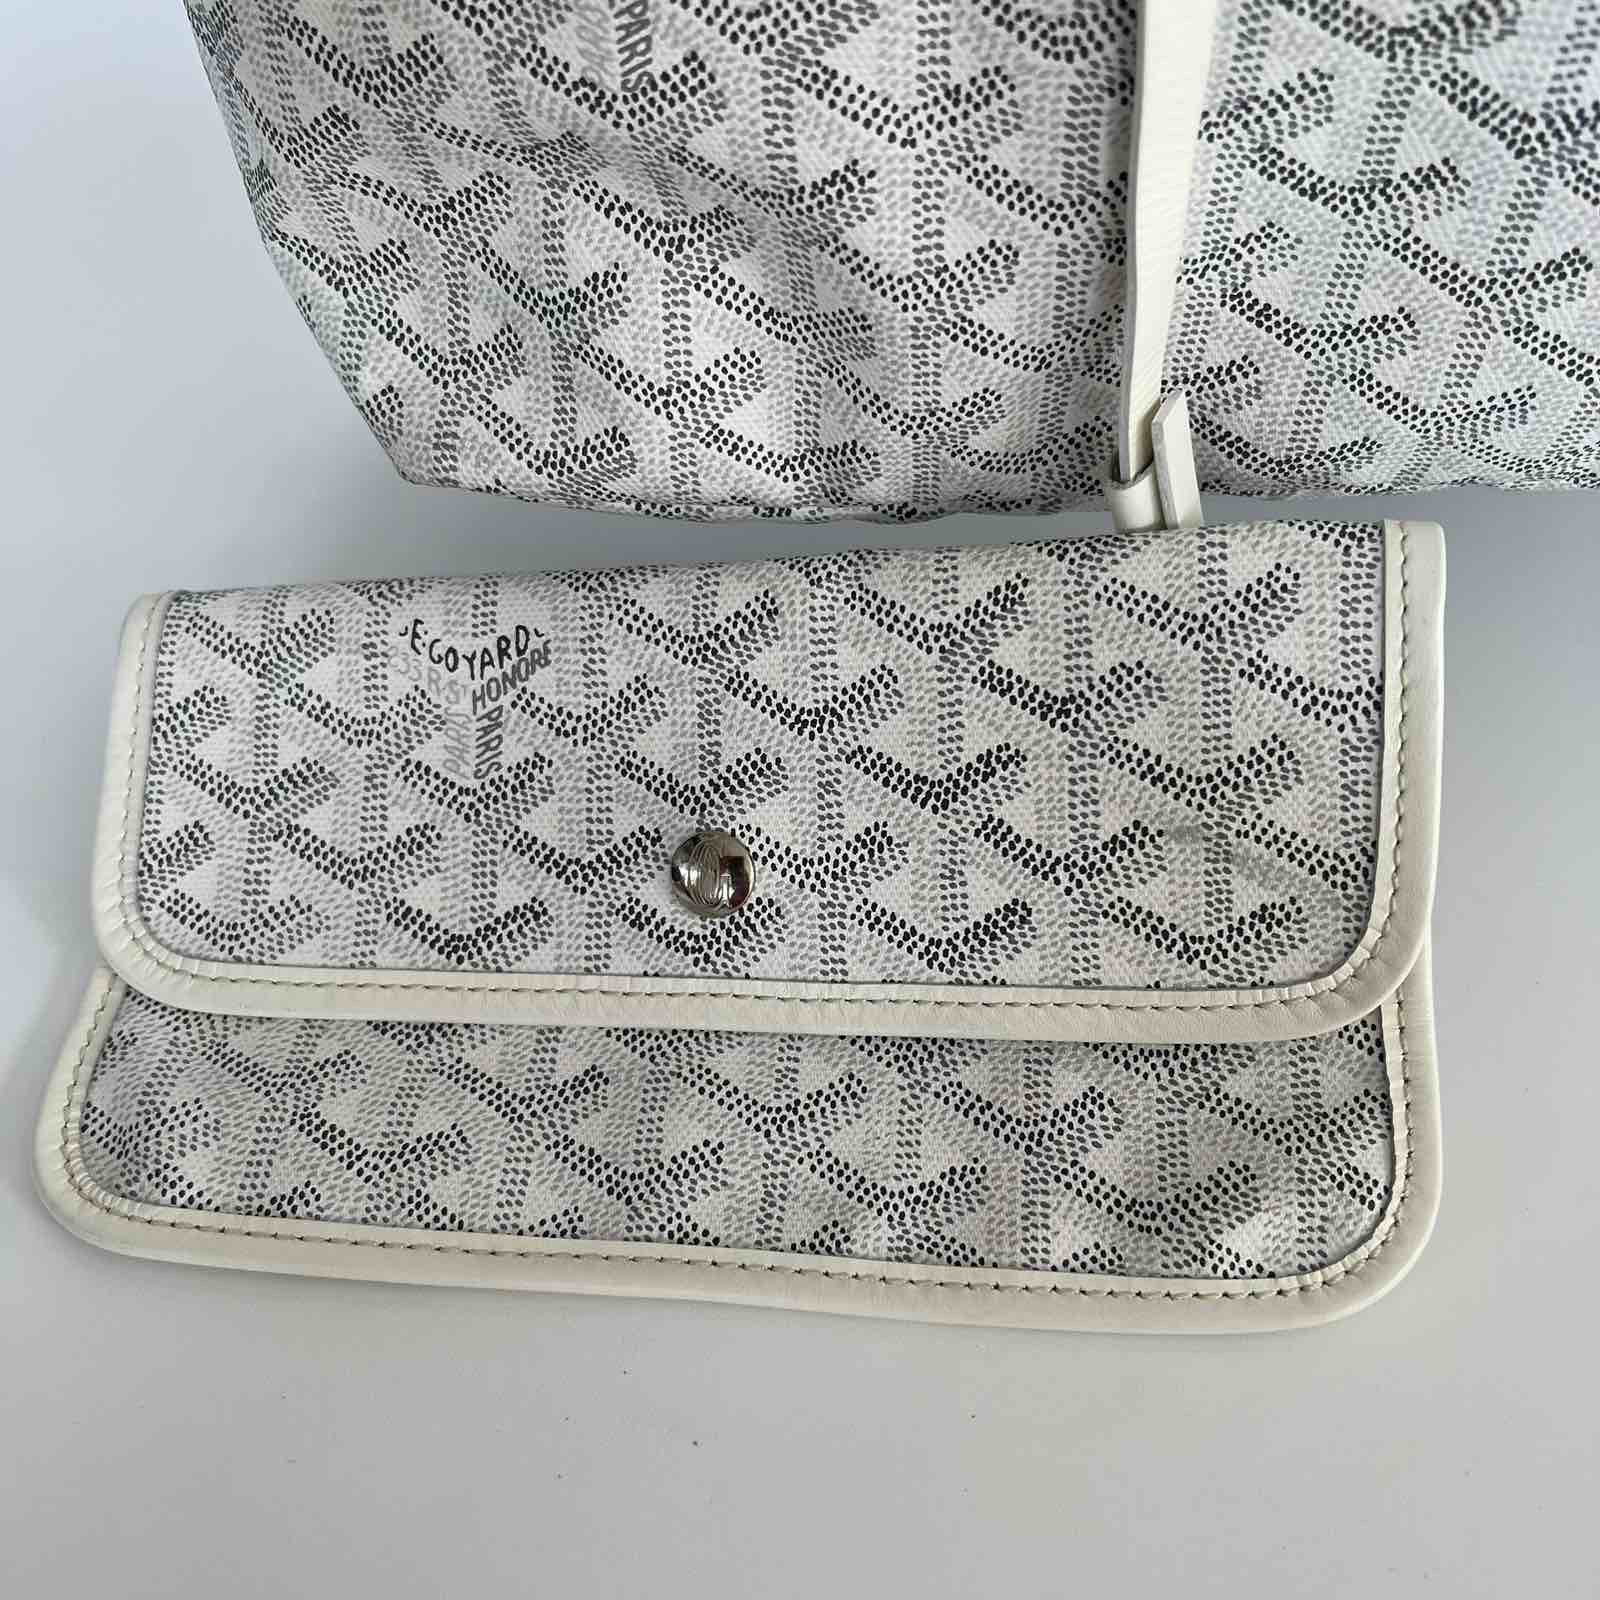 Goyard Rouette White. Made in France. With care cards ❤️ - Canon